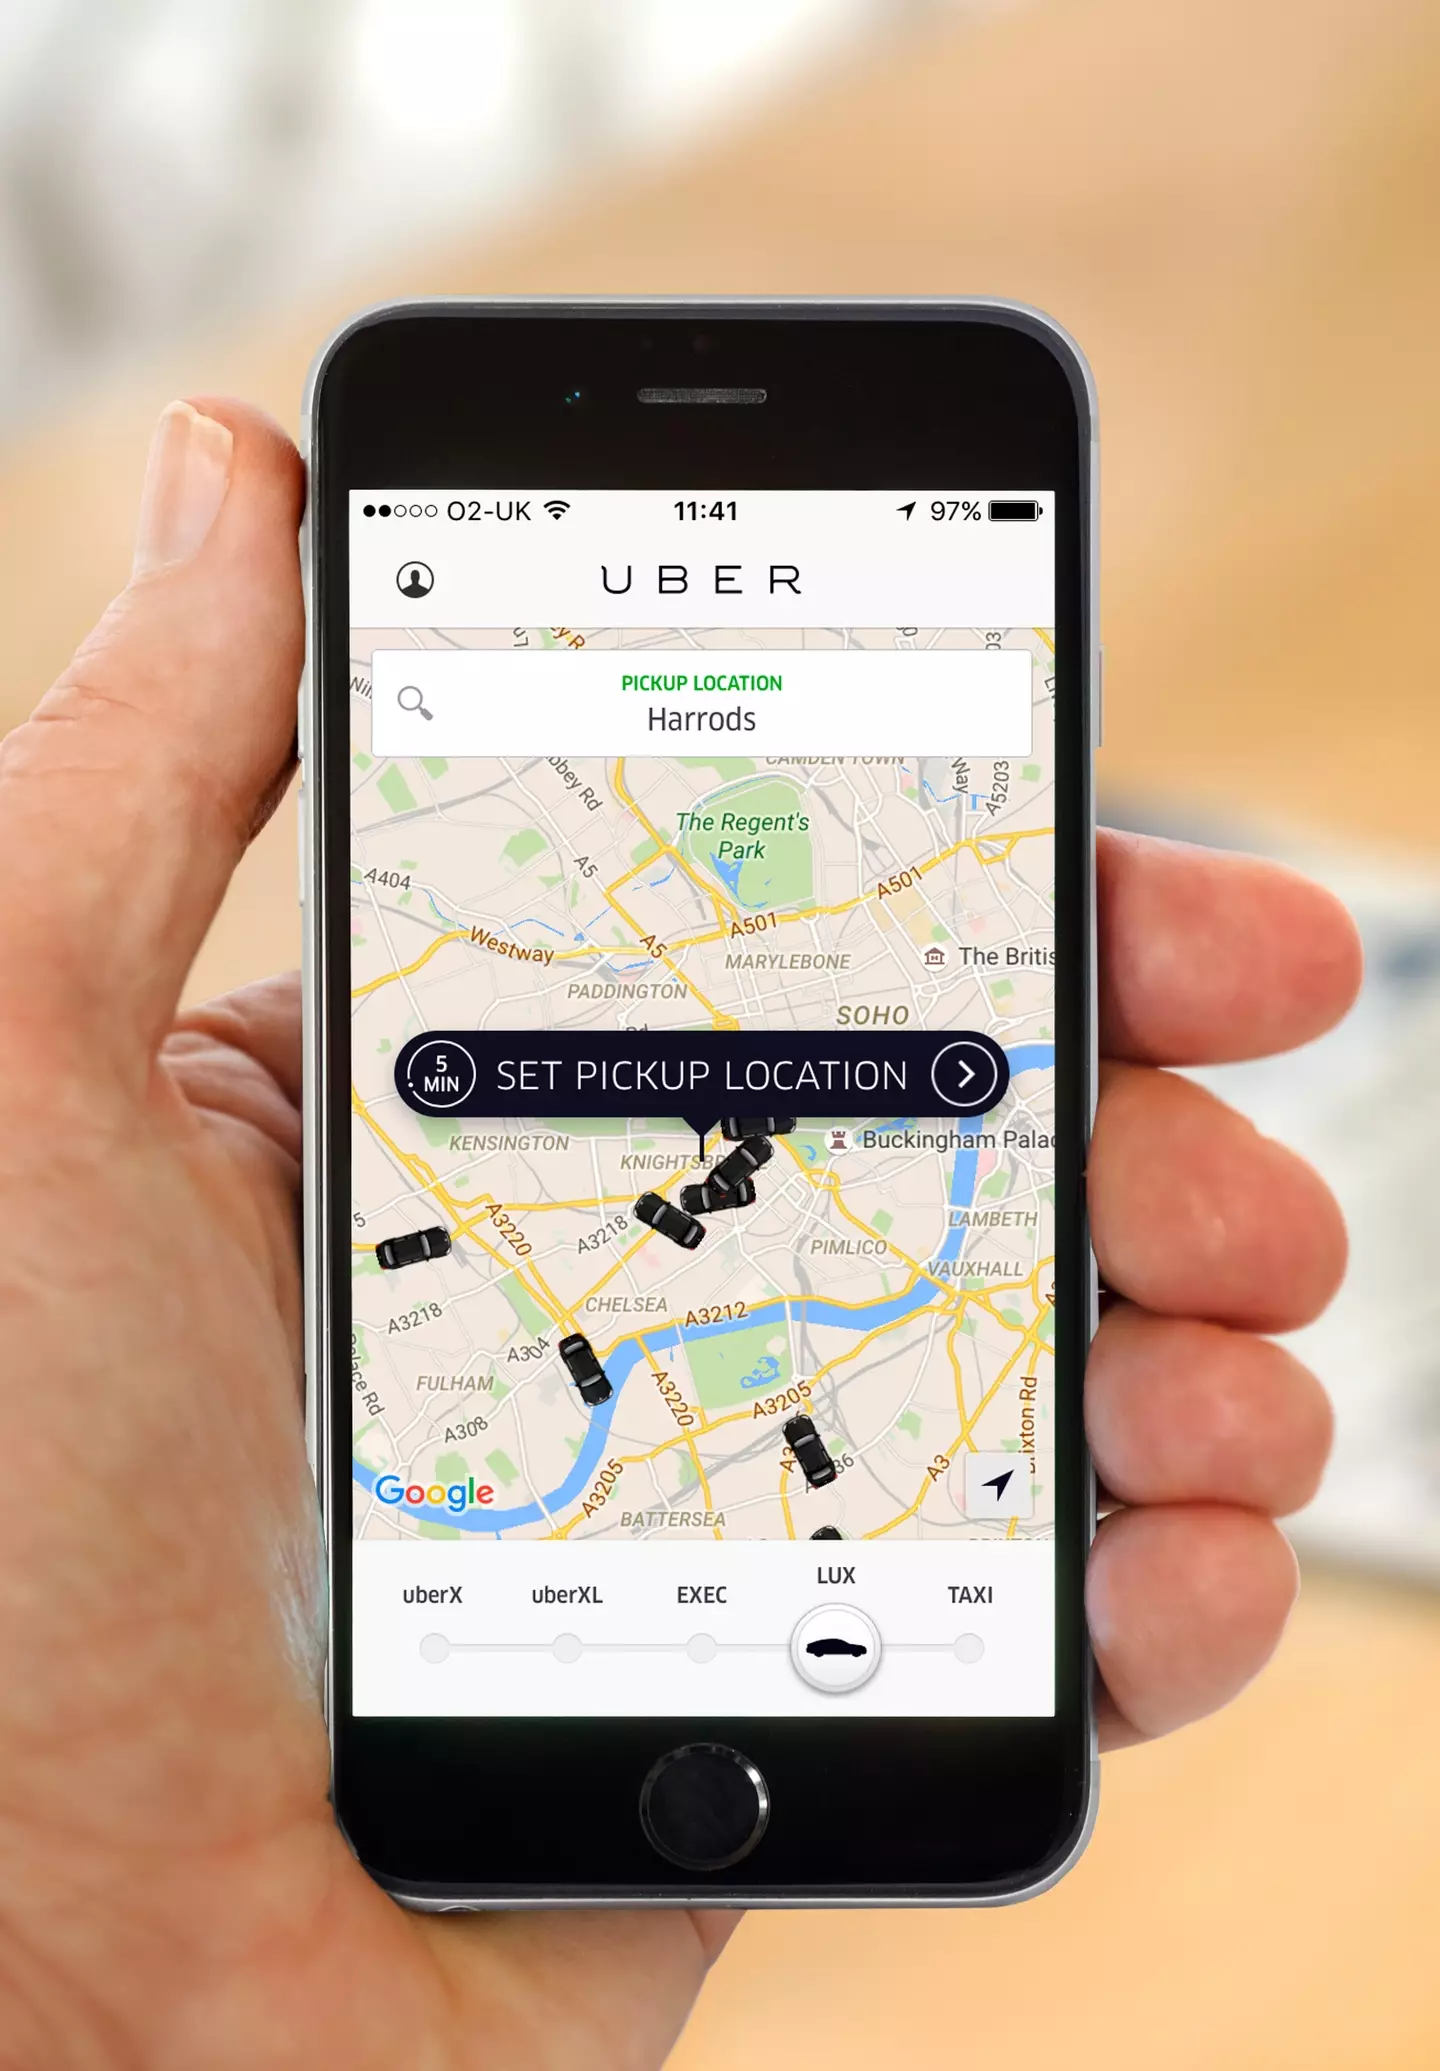 A standard Uber fare – which currently sits at around £18 – will burn a £27 hole in your pocket.